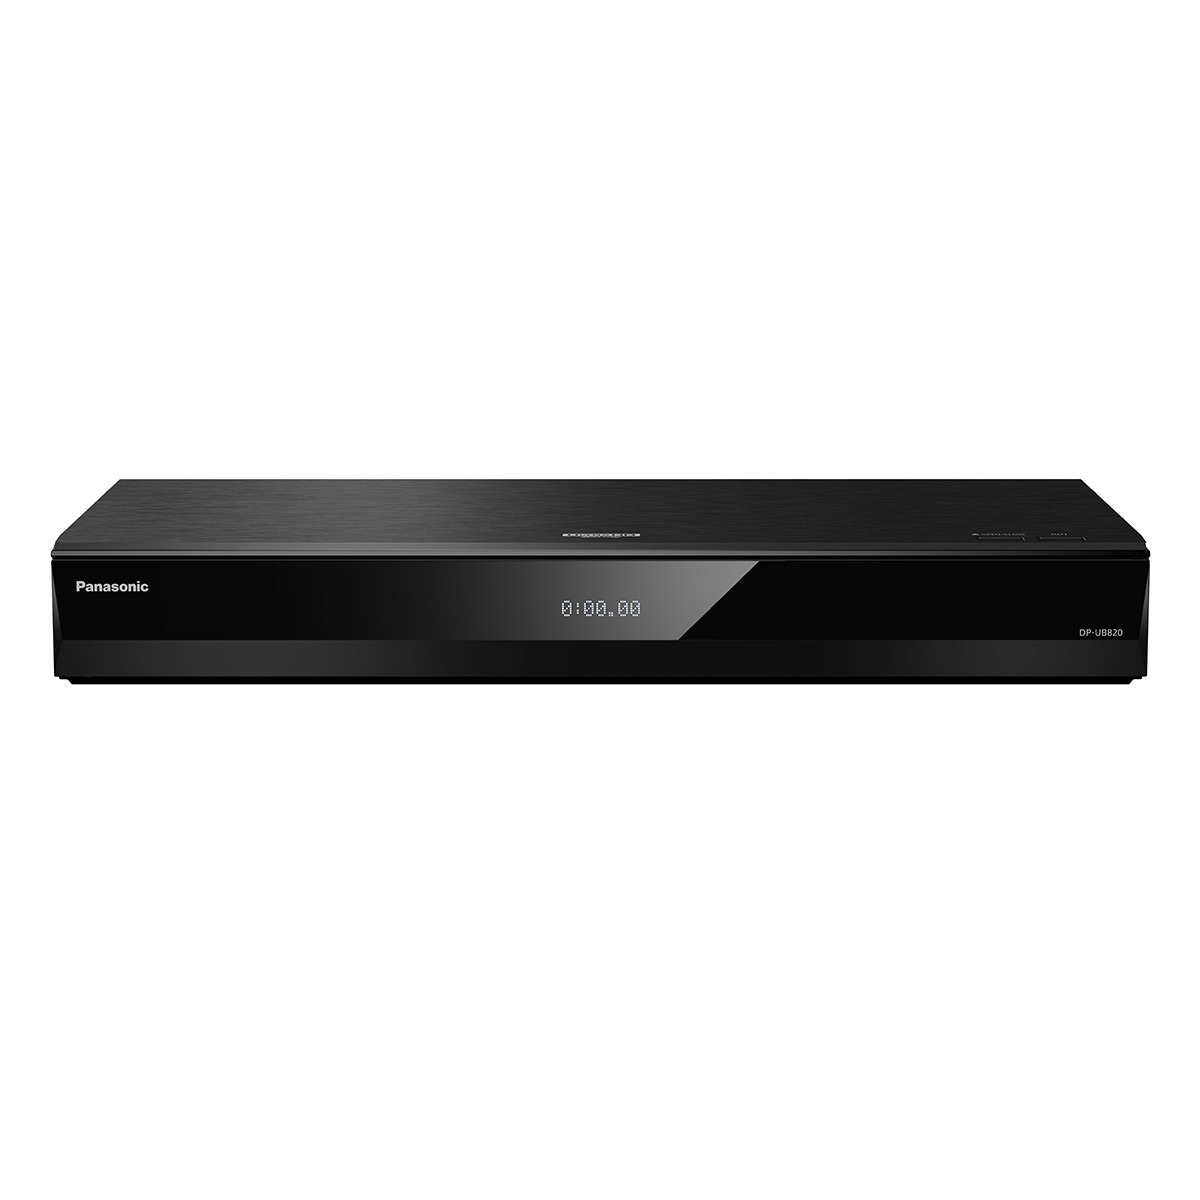 Panasonic DP-UB820-K 4K Ultra HD Blu-ray Player with HDR10+ and Dolby Vision Playback - image 1 of 4